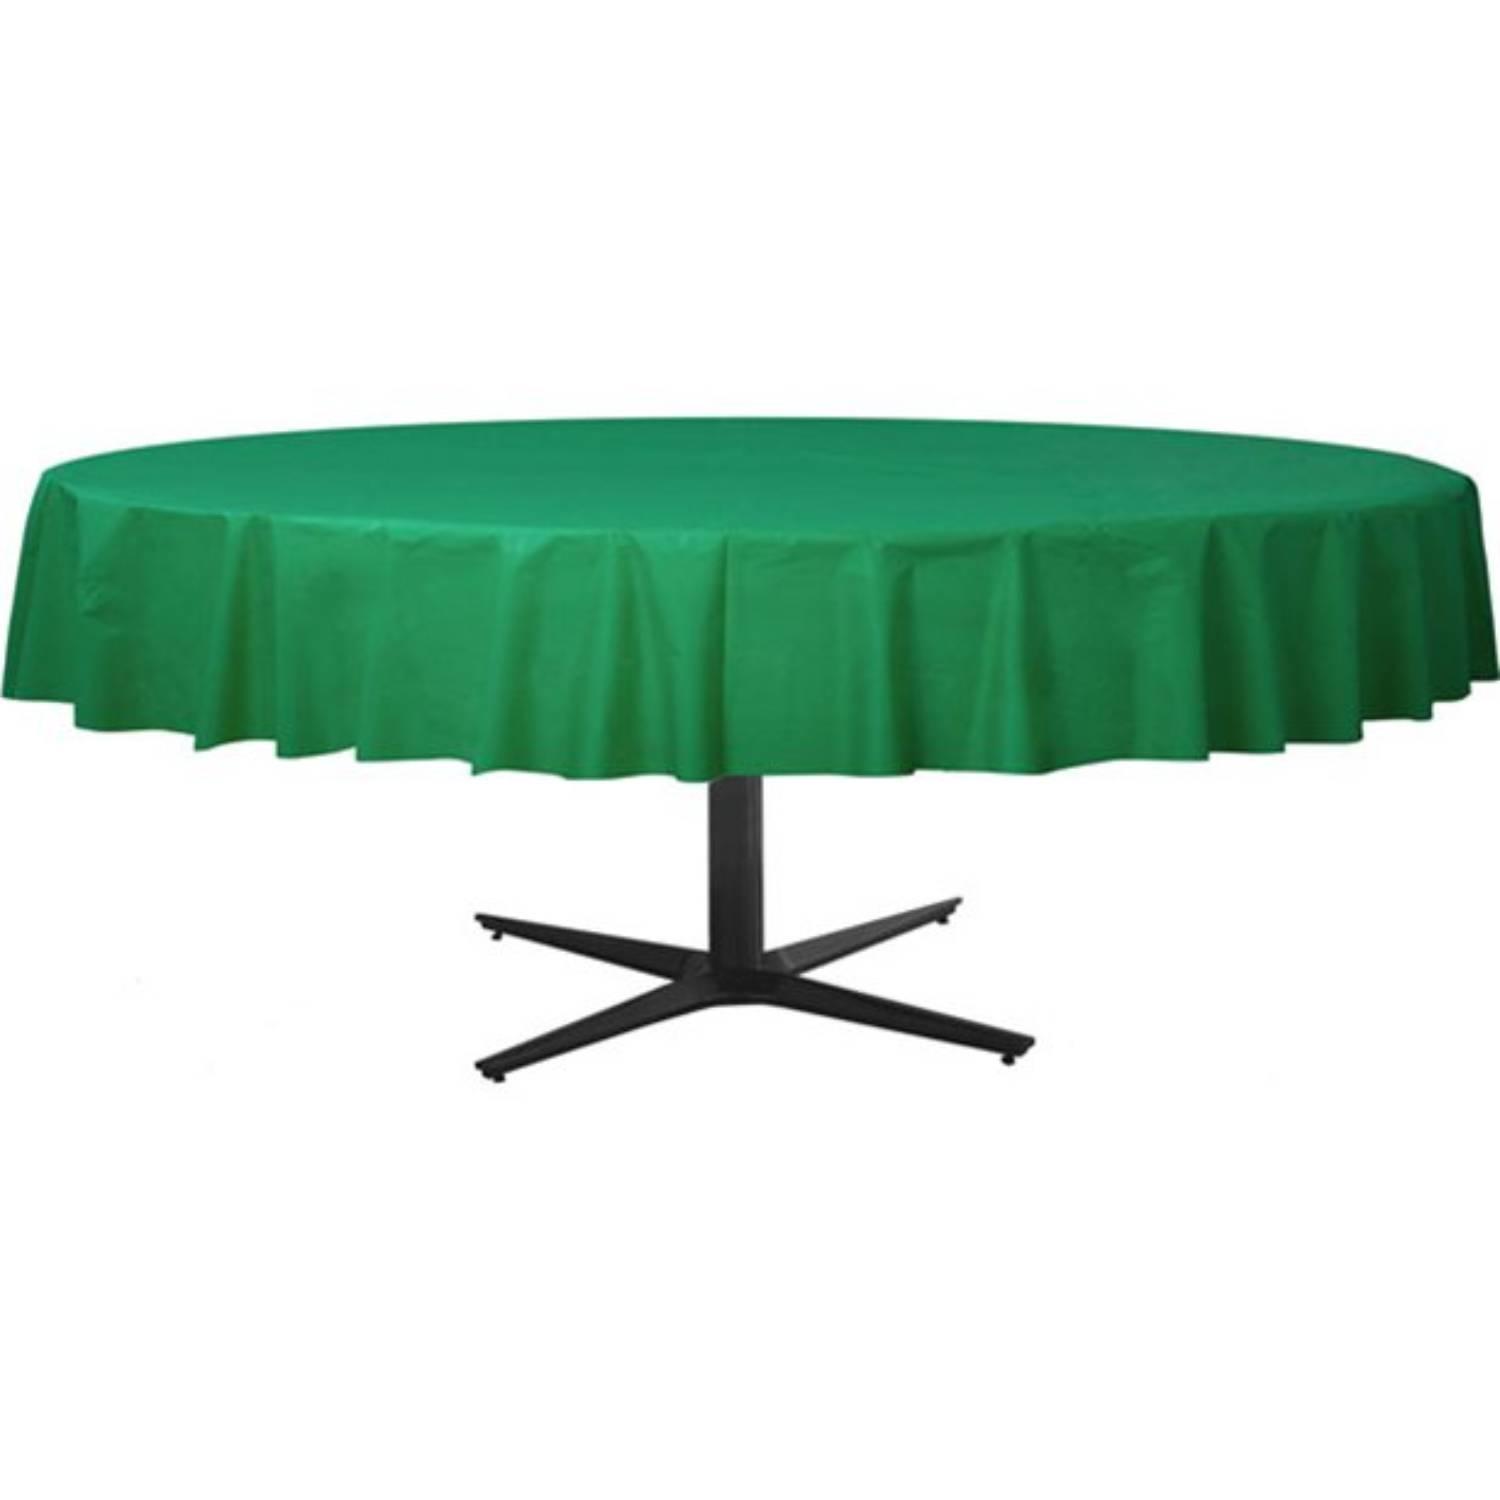 Circular Festive Green 2.1m plastic tablecover by Amscan 77018-03 available here at Karnival Costumes online party shop